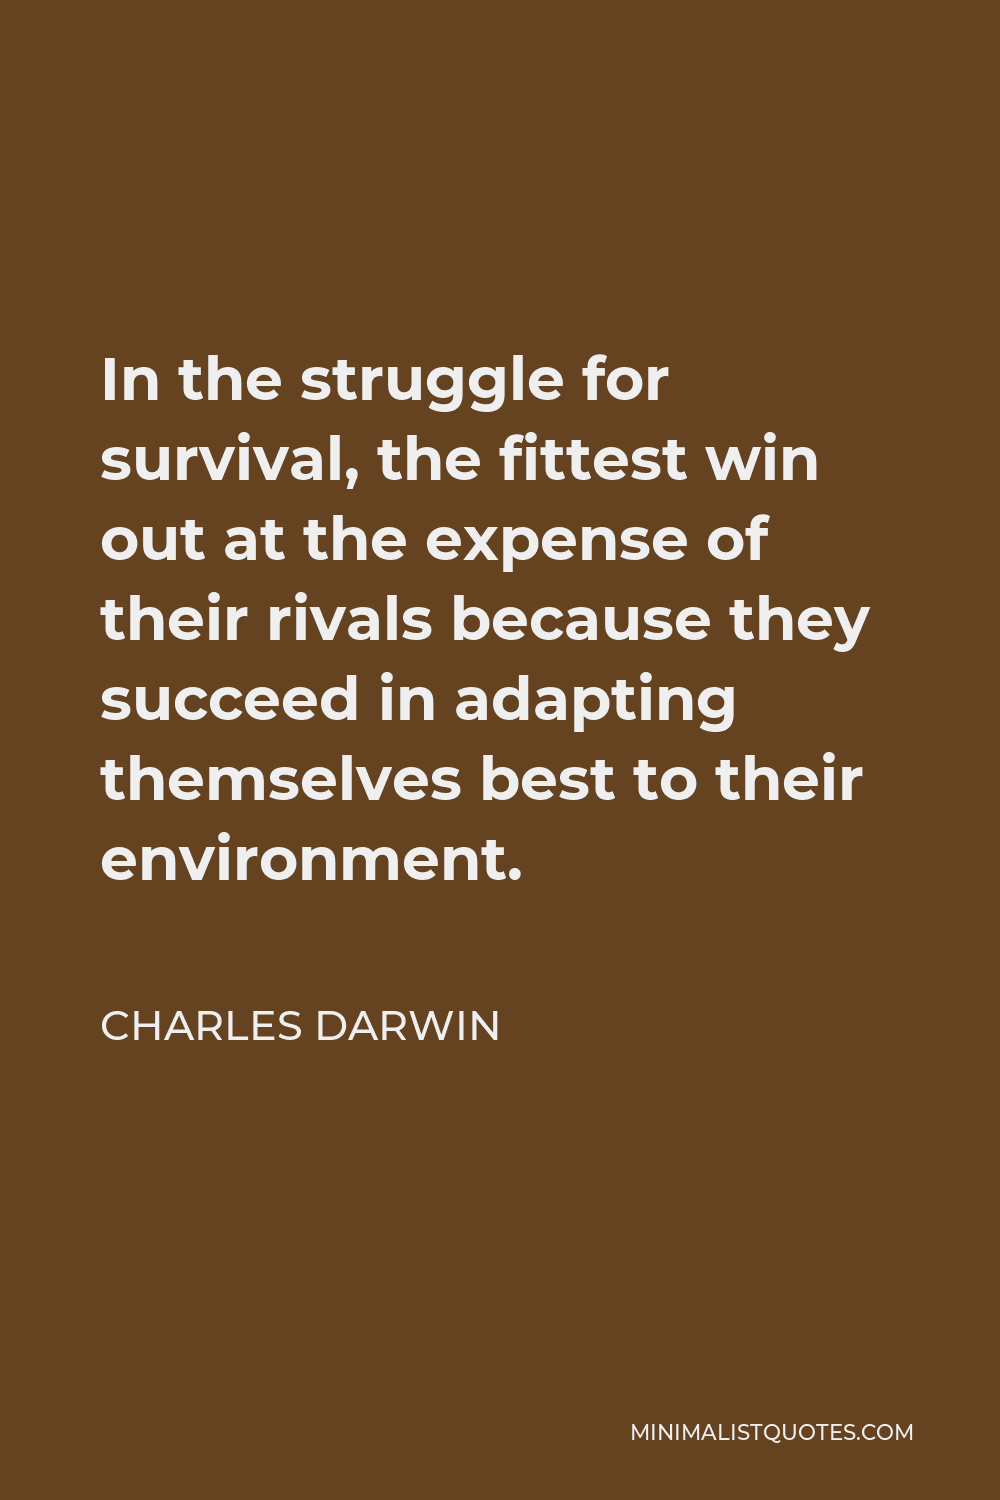 Charles Darwin Quote - In the struggle for survival, the fittest win out at the expense of their rivals because they succeed in adapting themselves best to their environment.